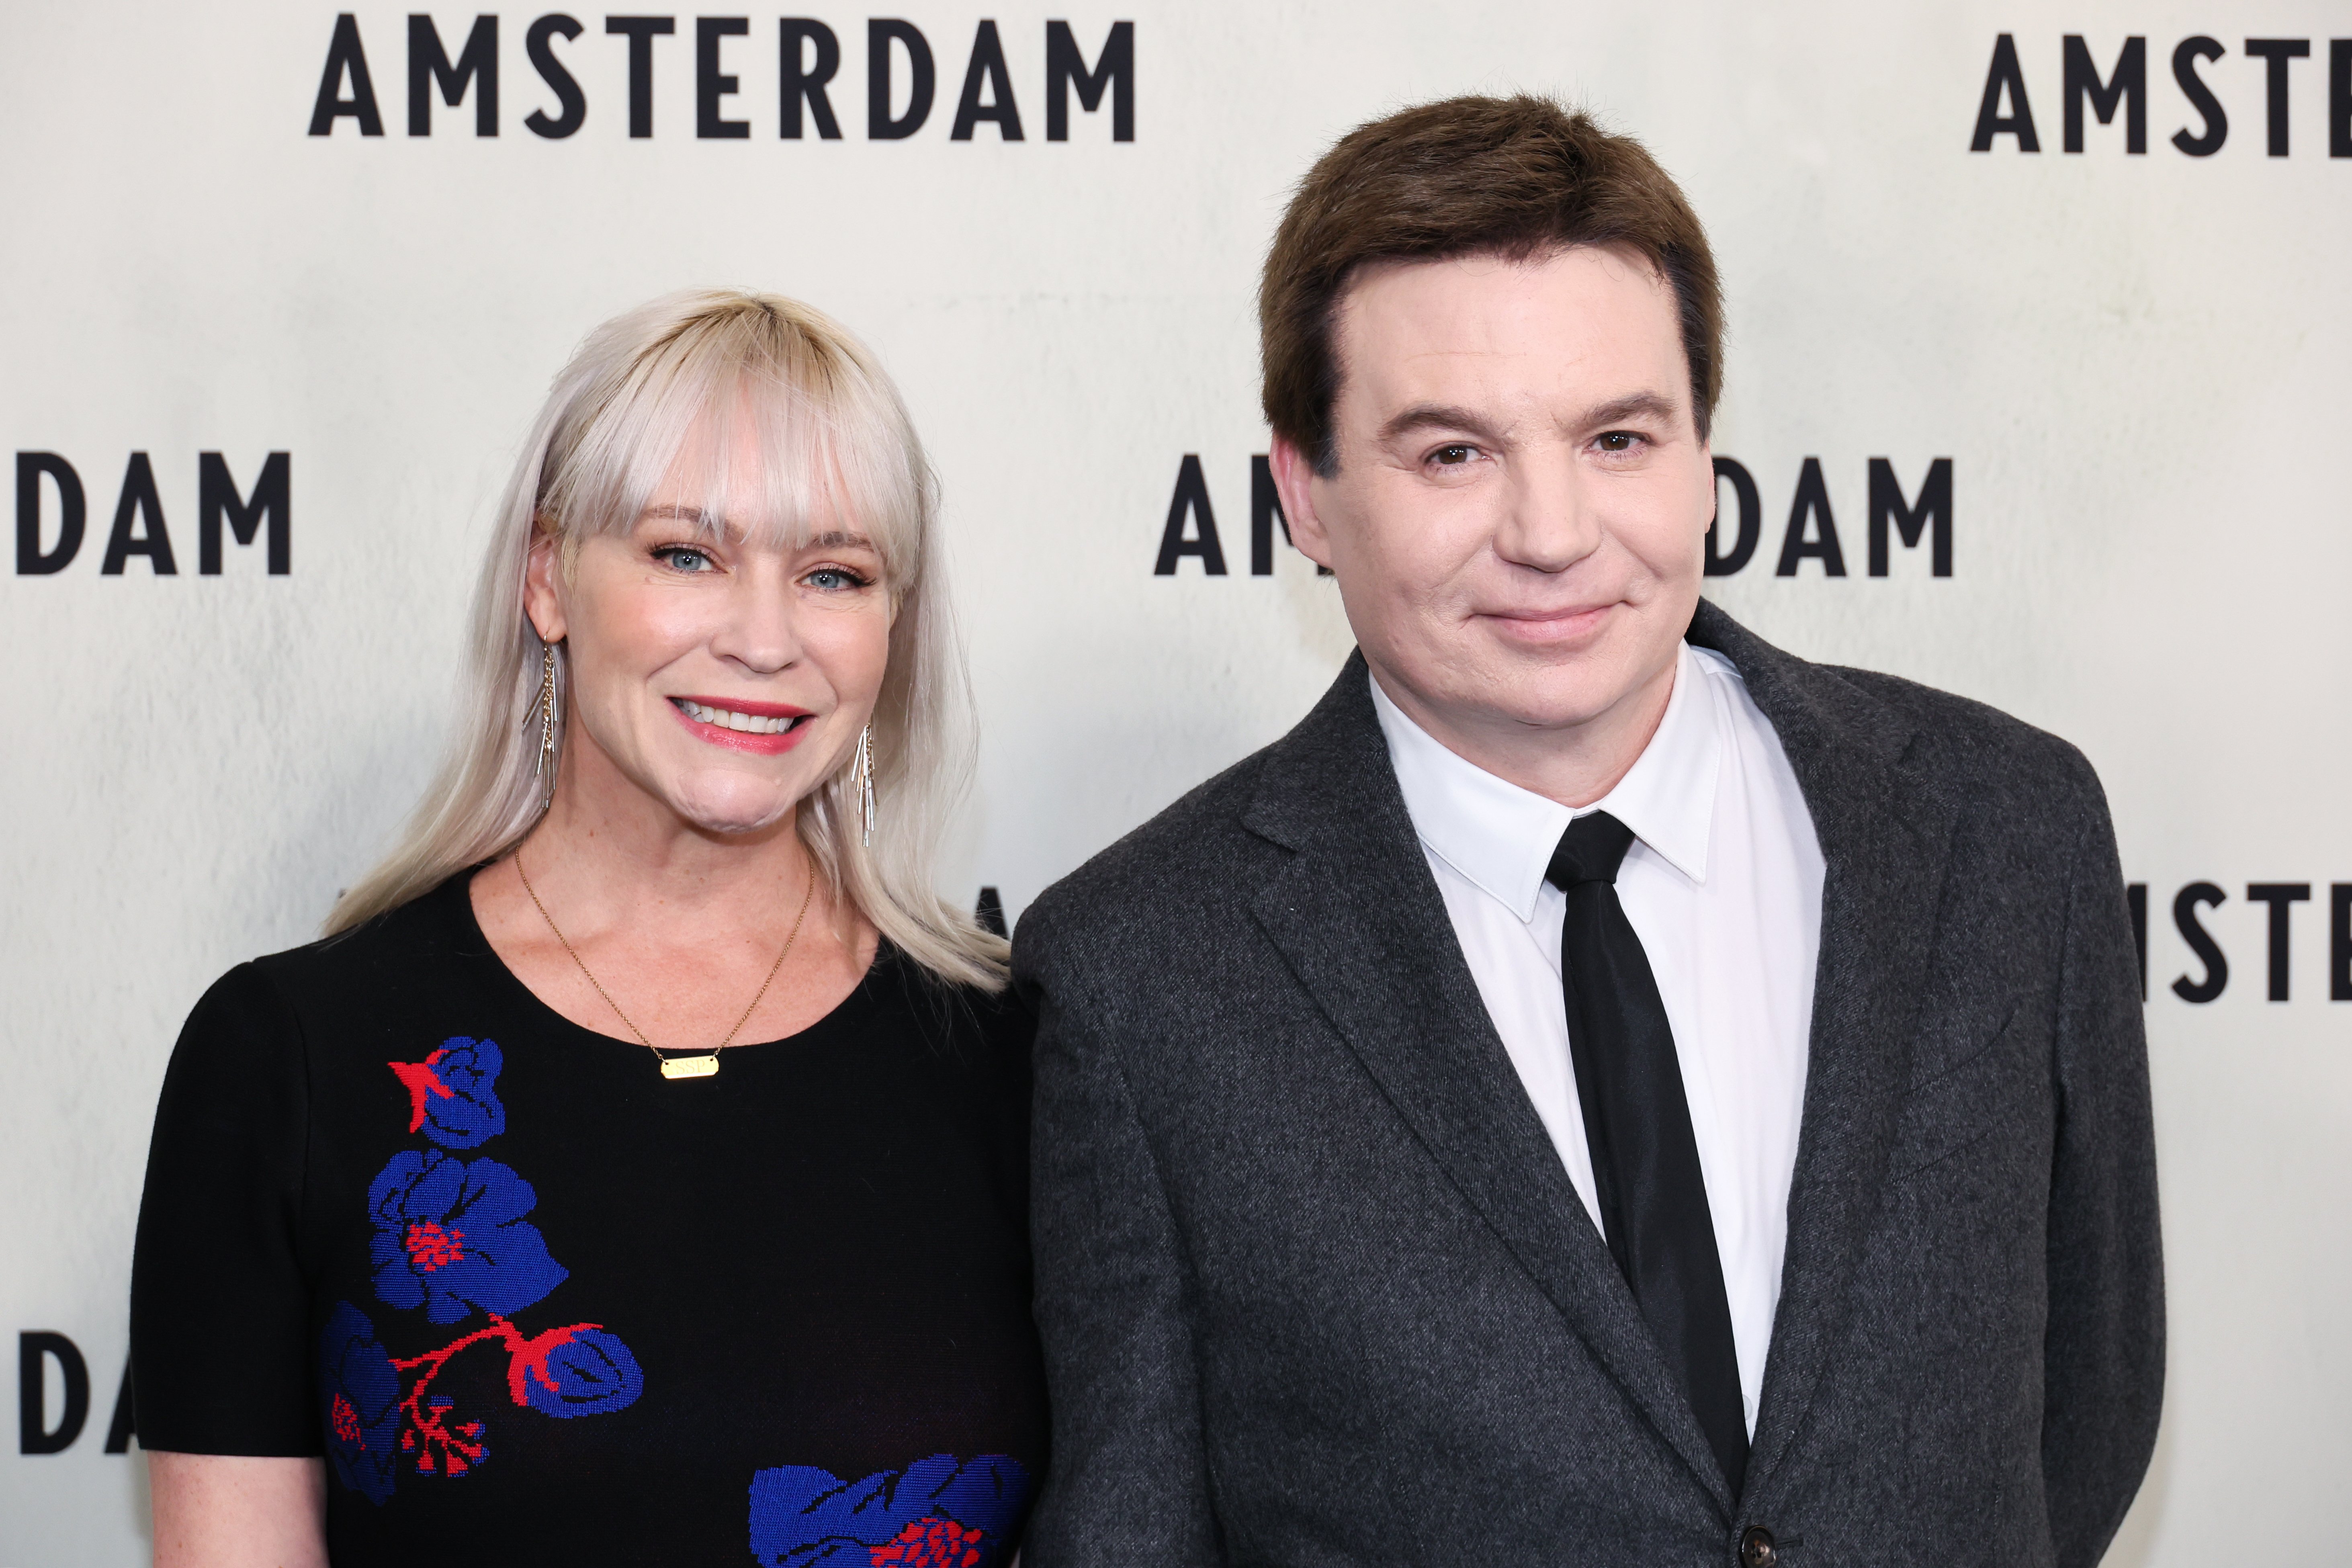 Kelly Tisdale and Mike Myers at the world premiere of "Amsterdam" on September 18, 2022, in New York | Source: Getty Images